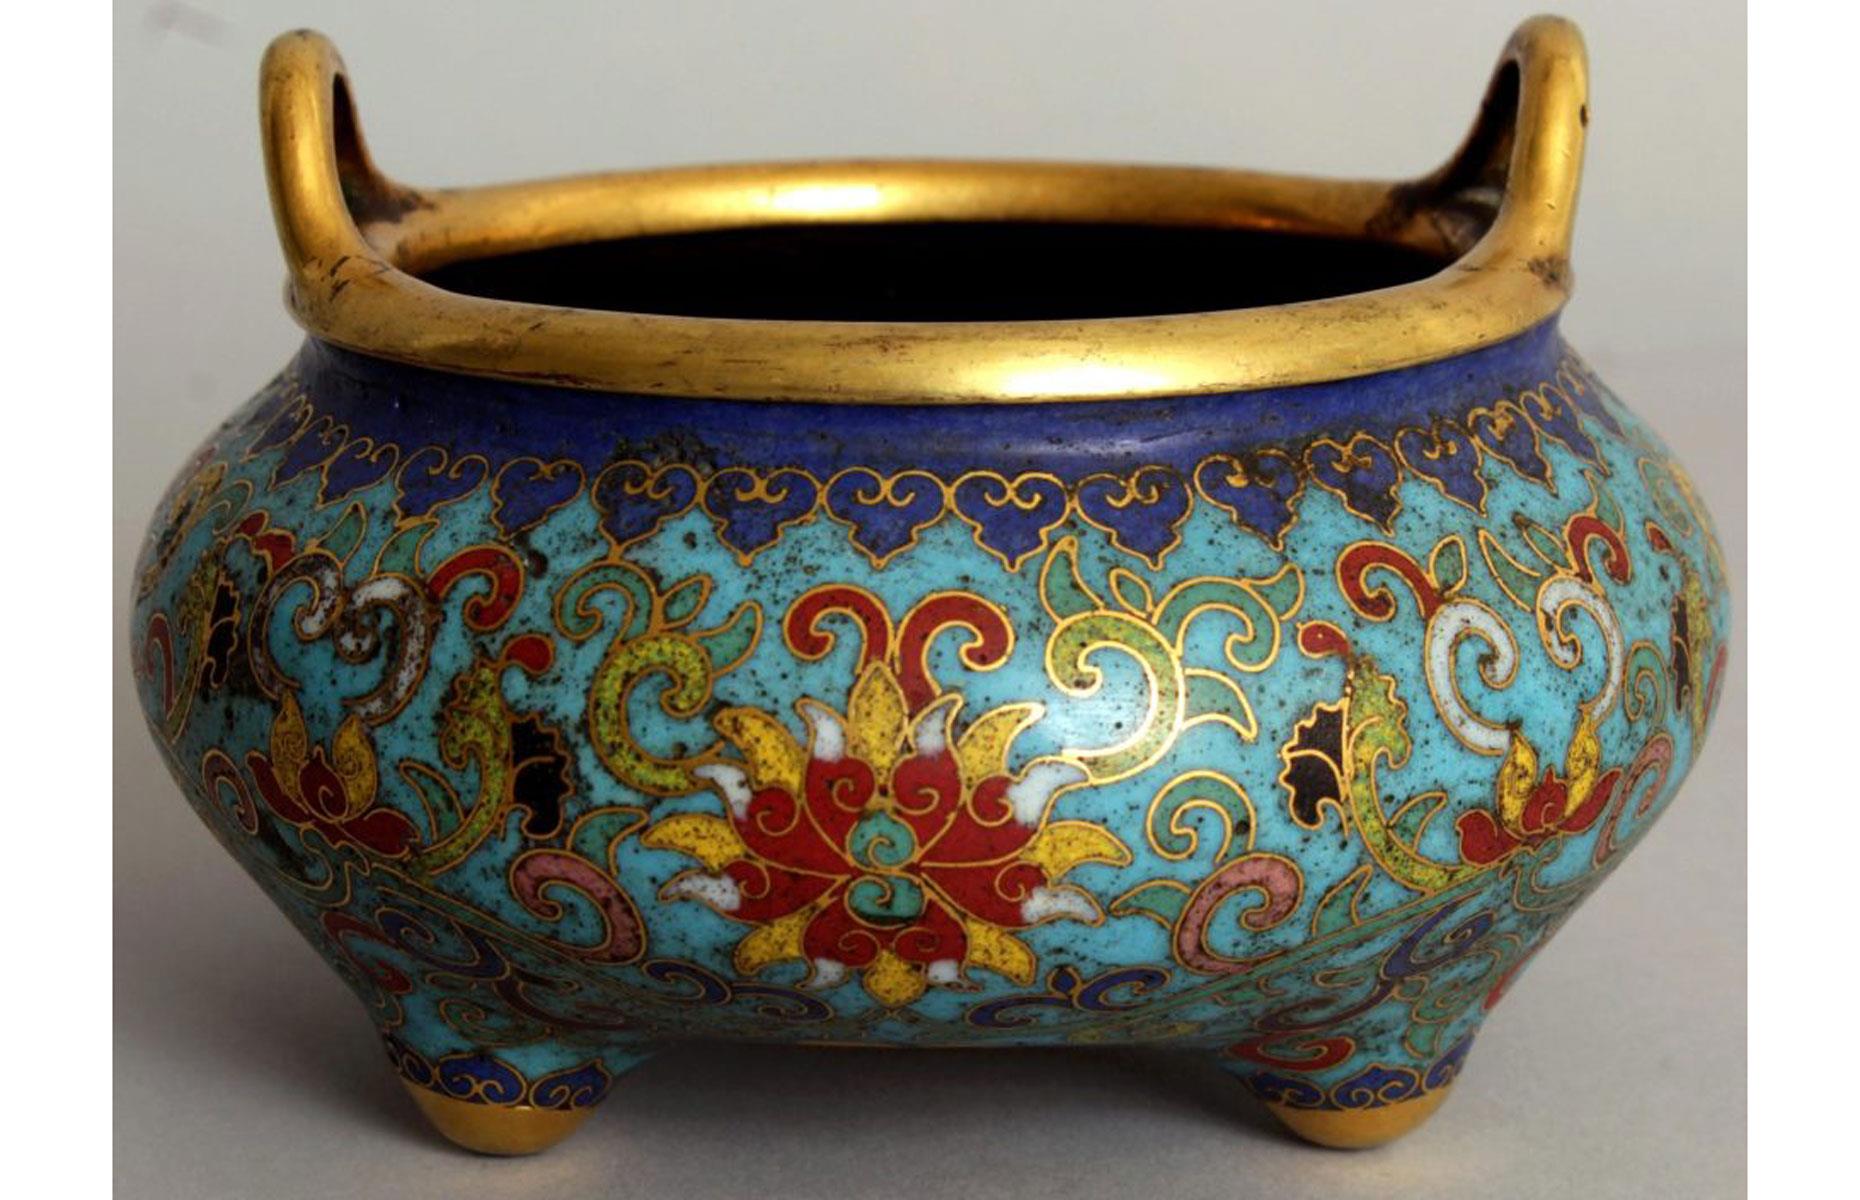 The 18th-century Chinese bowl sold for $27,300 (£21k)